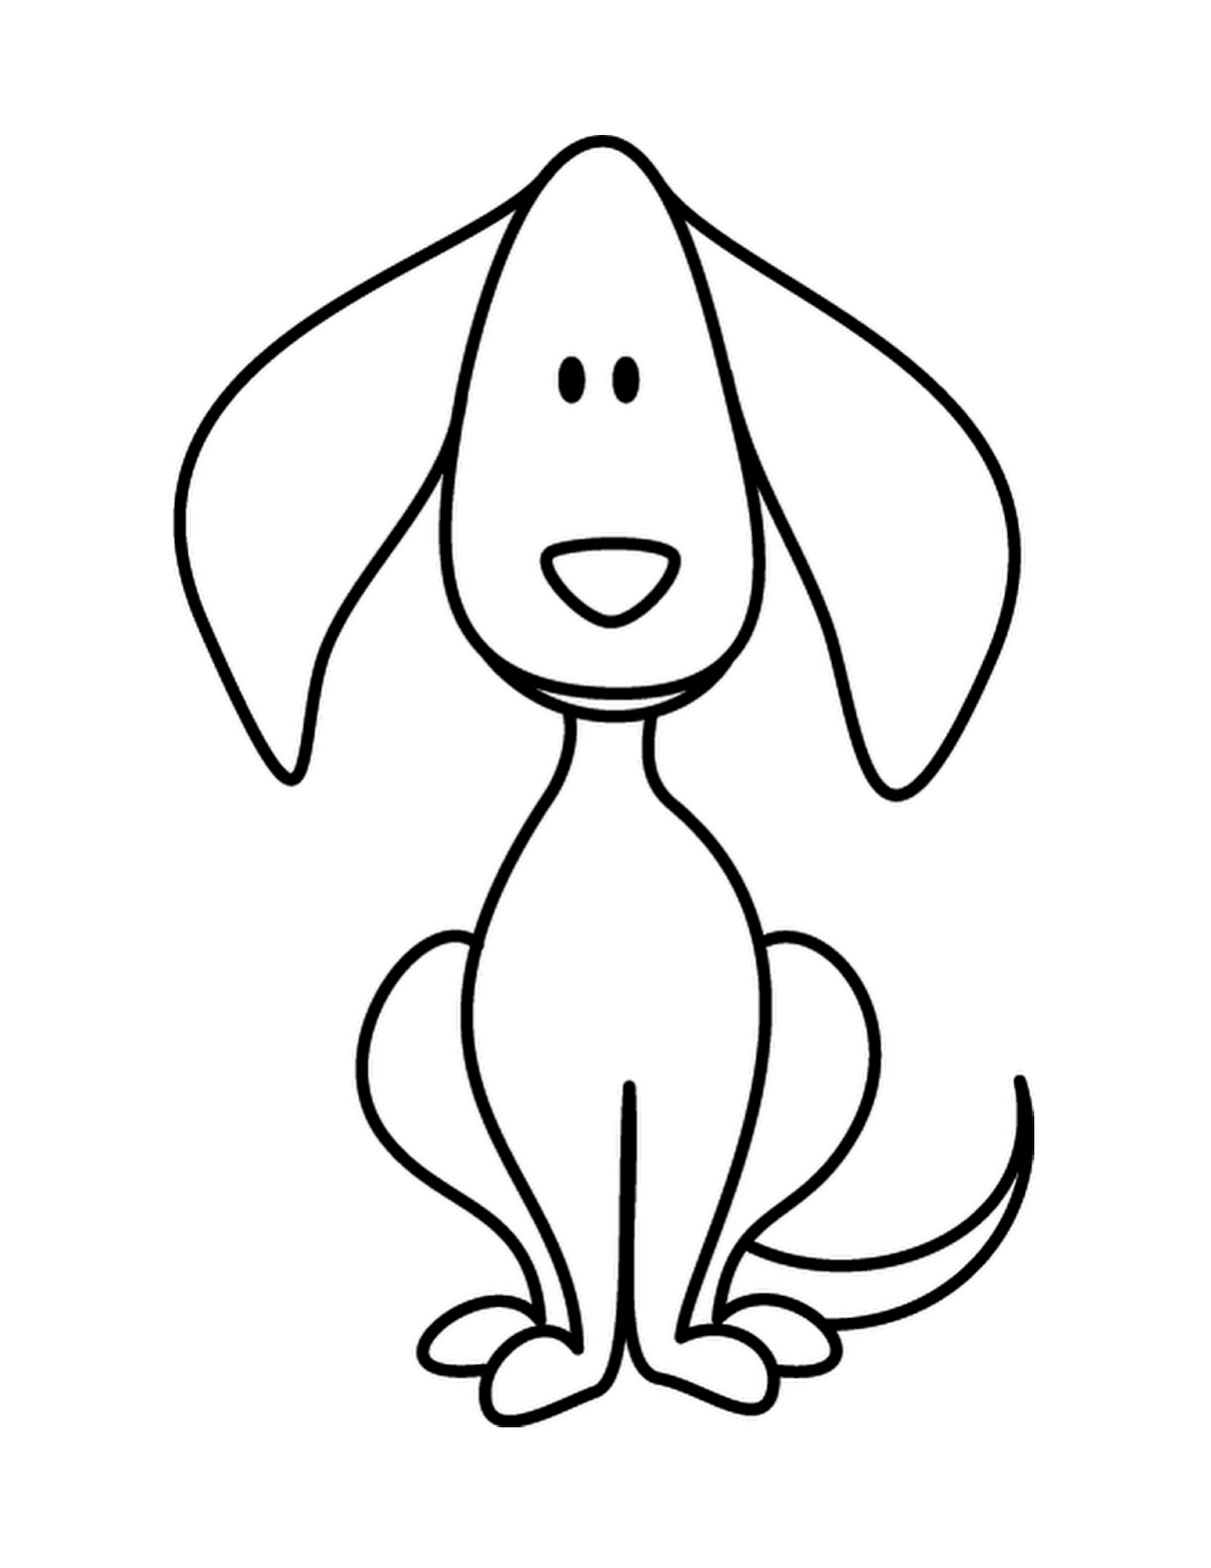 How to Draw a Simple Cartoon Dog: 11 Steps (with Pictures)